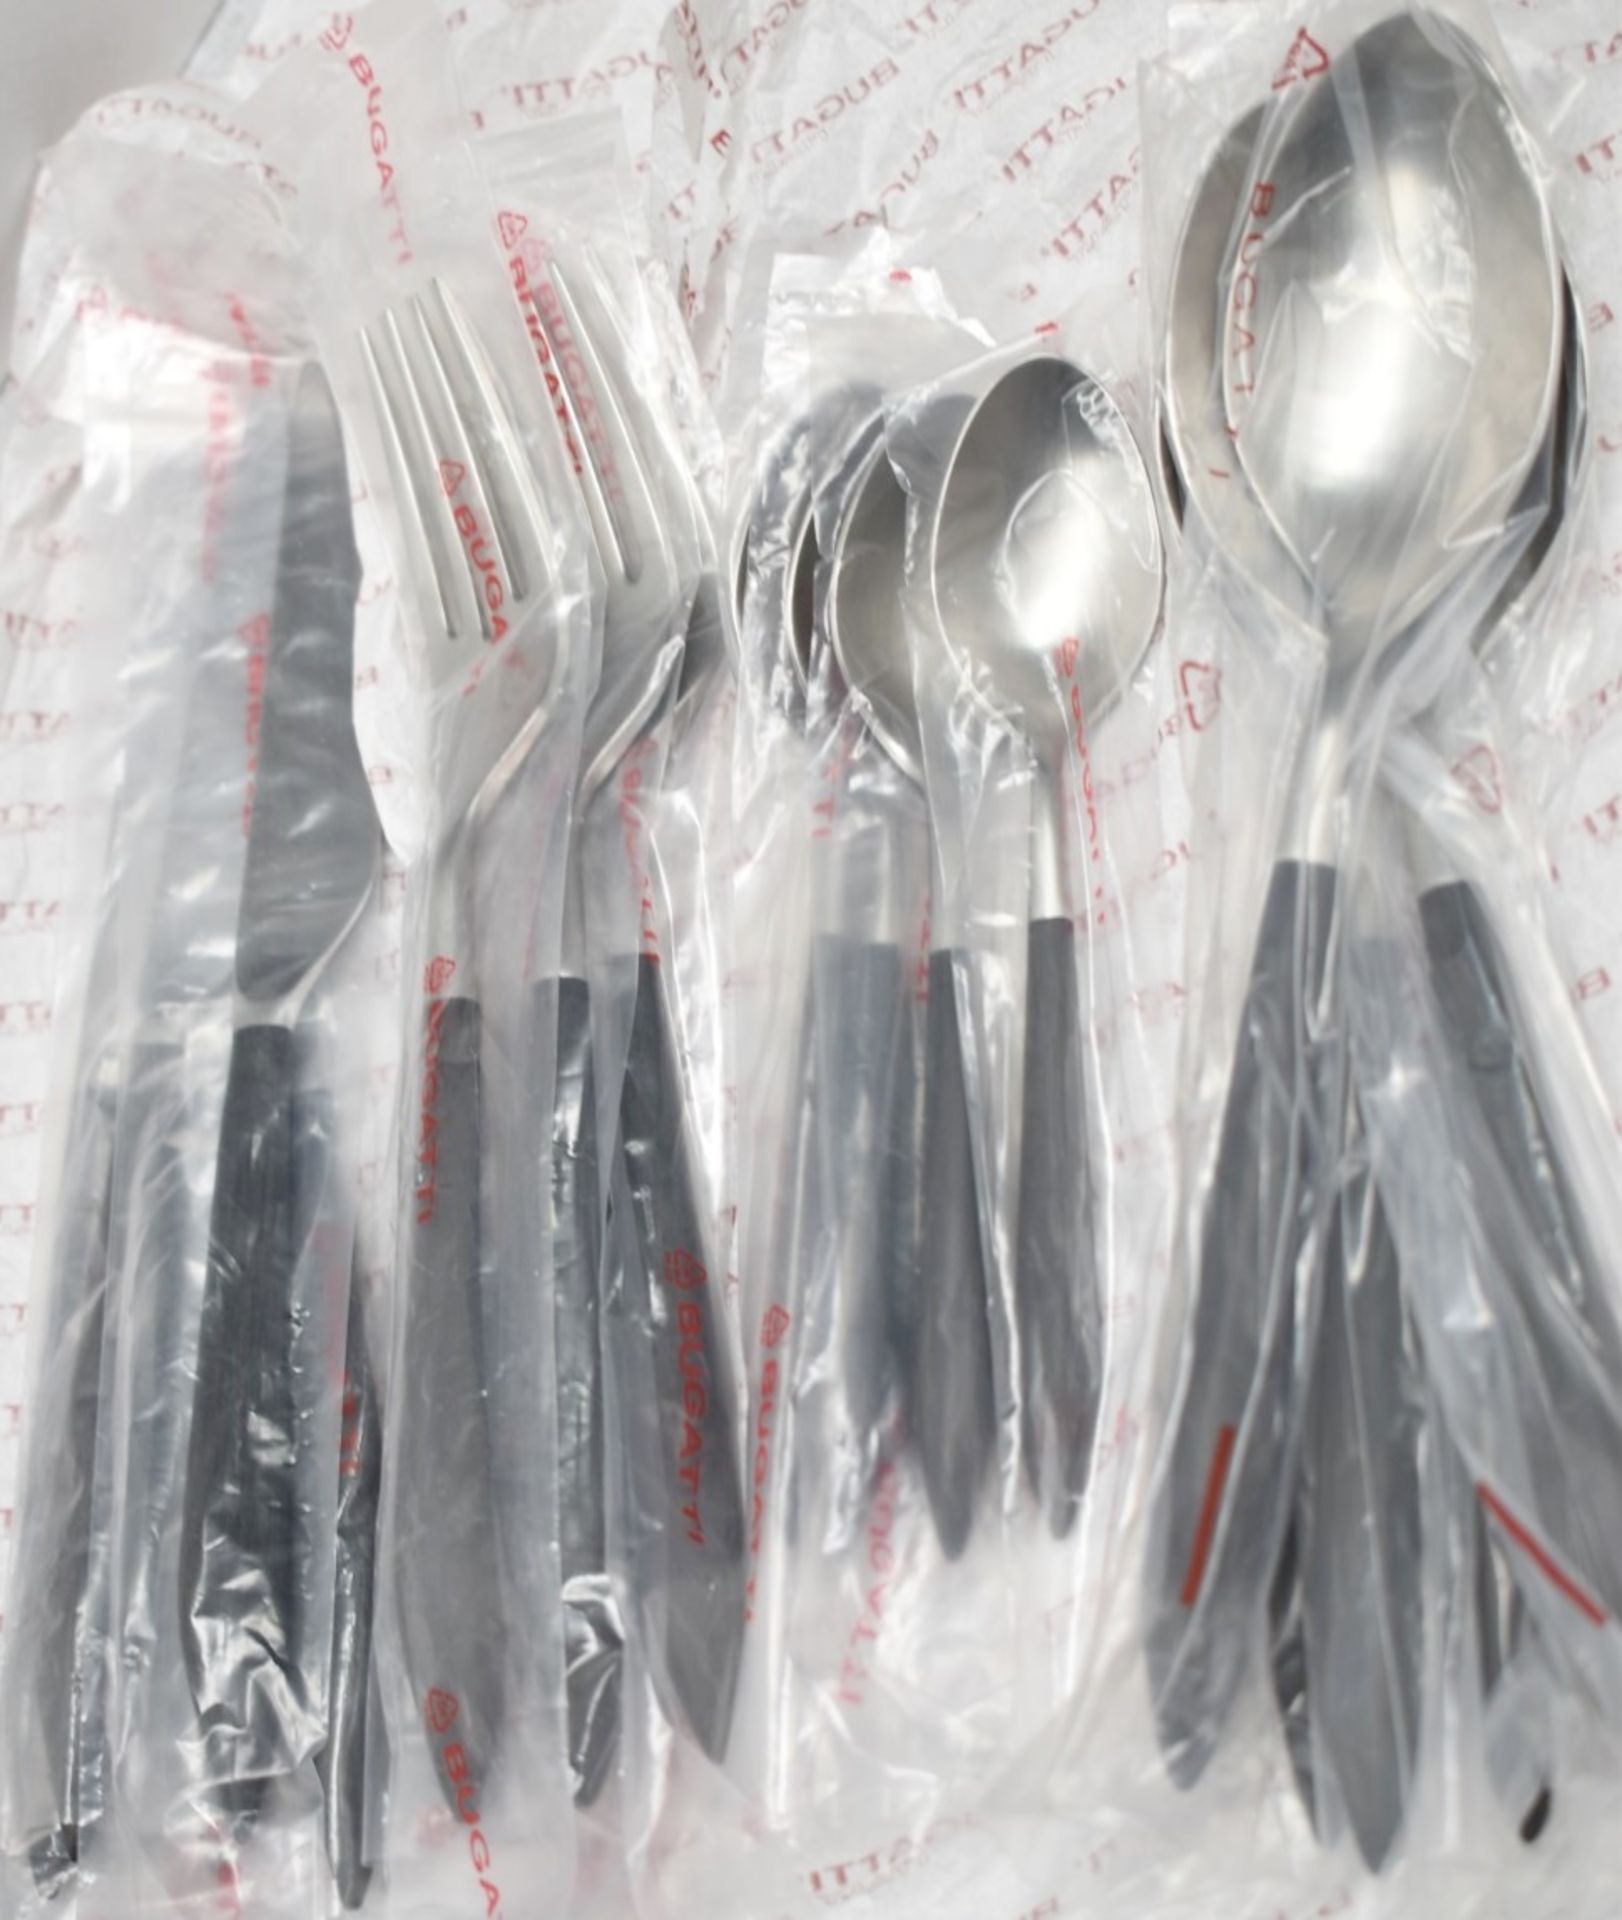 1 x BUGATTI 'Ares' Stainless Steel 24-Piece Cutlery Set - RRP £299.99 - Boxed Stock - Image 3 of 10